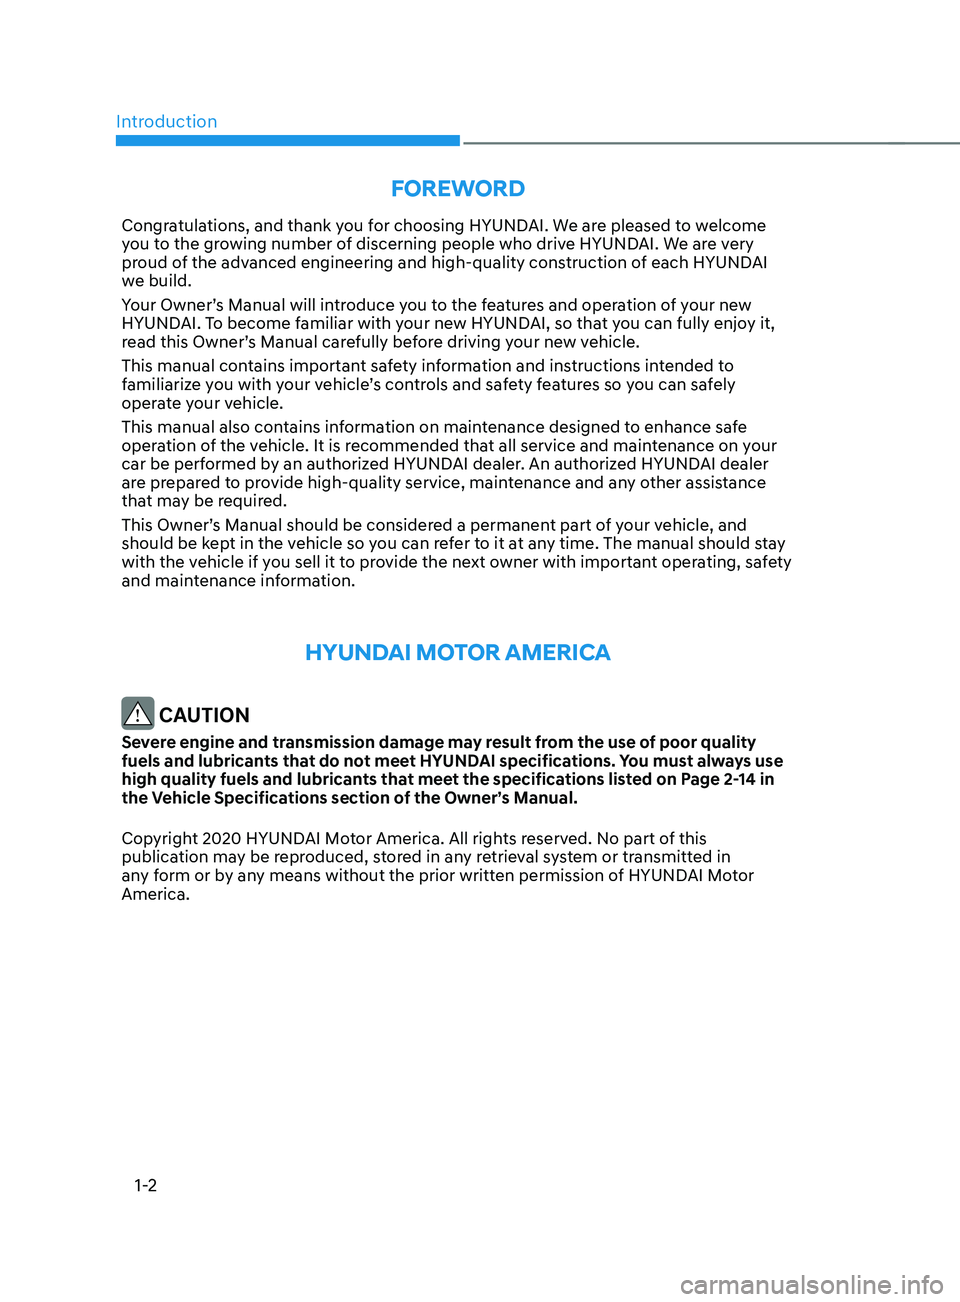 HYUNDAI SANTA FE CALLIGRAPHY 2021  Owners Manual Introduction
1-2
FOREWORD
Congratulations, and thank you for choosing HYUNDAI. We are pleased to welcome 
you to the growing number of discerning people who drive HYUNDAI. We are very 
proud of the ad